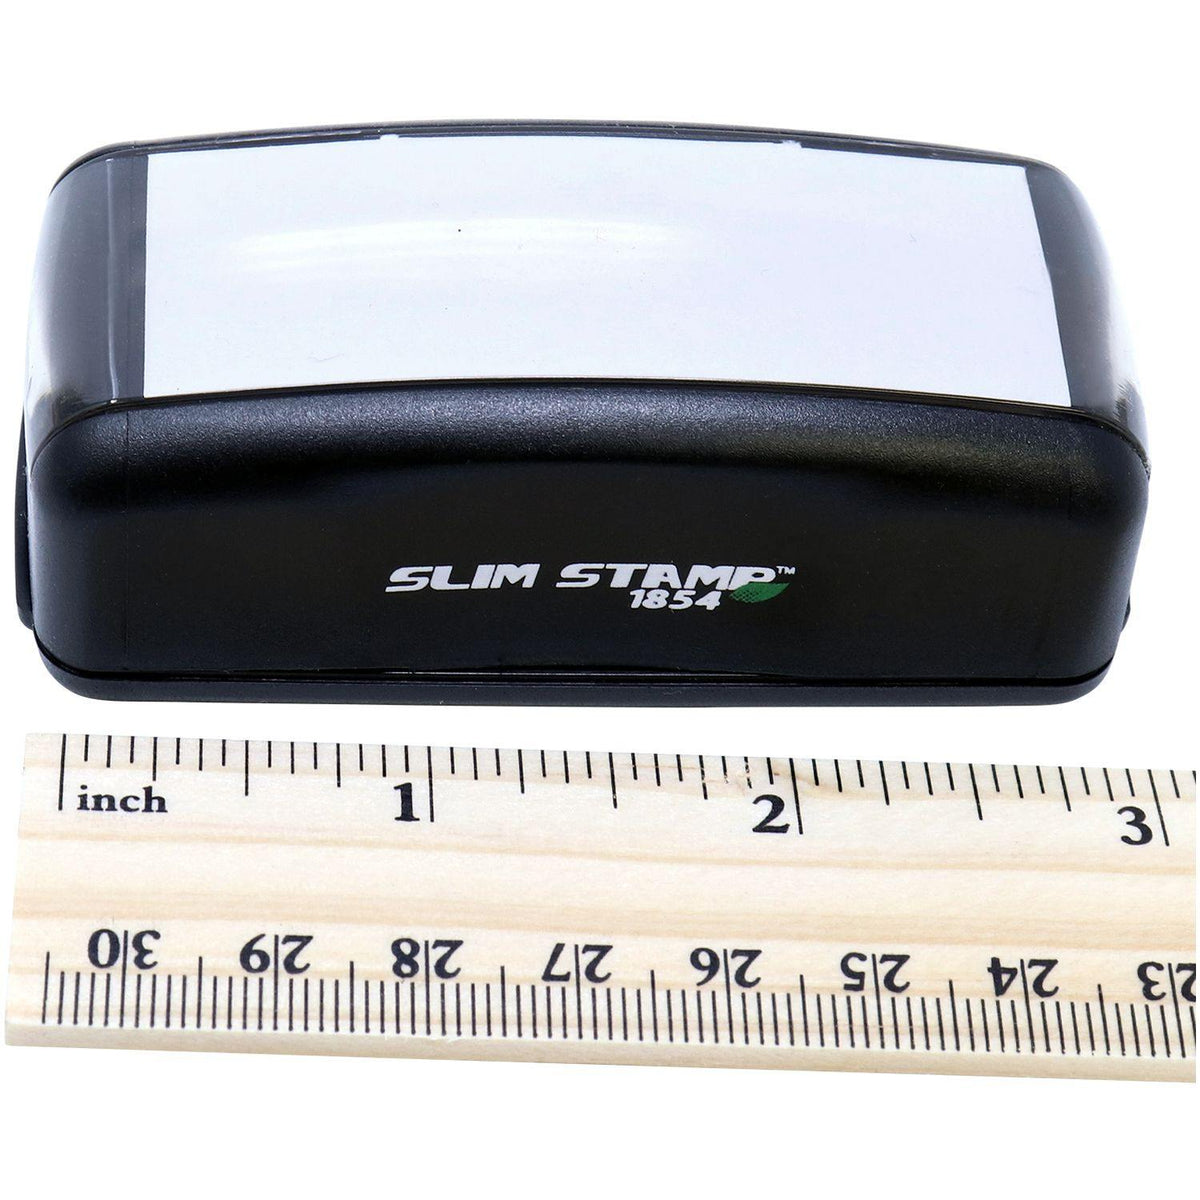 Measurement Large Pre Inked Duplicate Stamp with Ruler